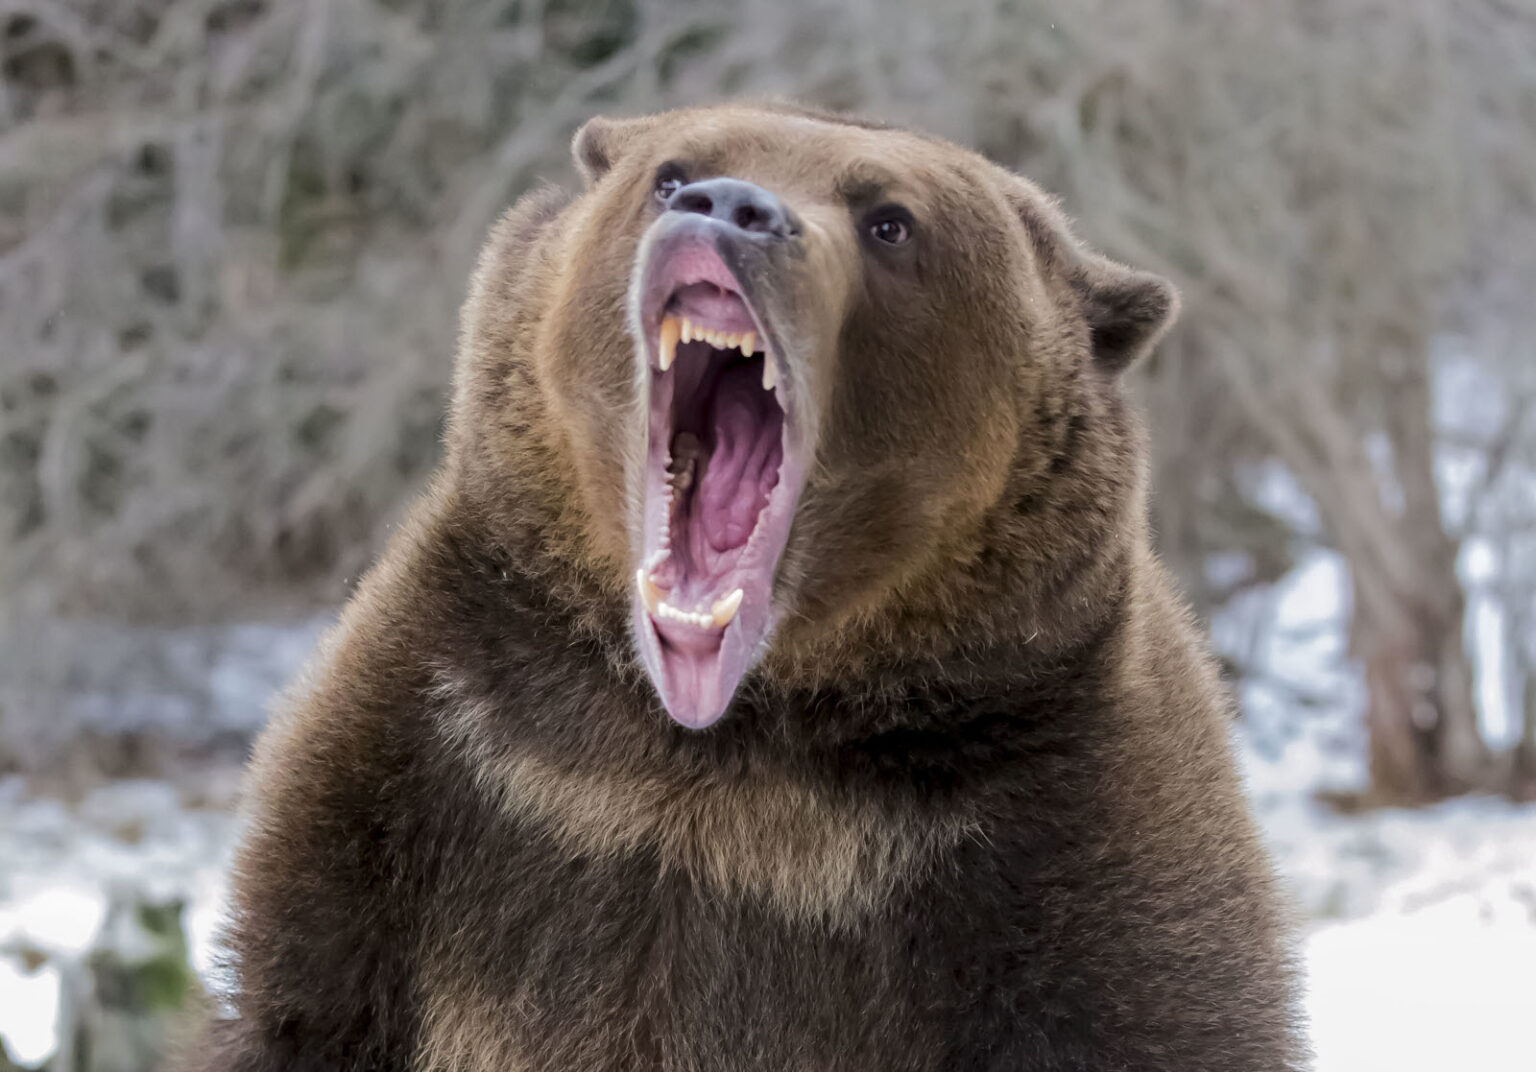 Confused about bullish bulls and bearish bears? Learn what a bear market is, how to survive one, and how you can invest to weather the storm now.